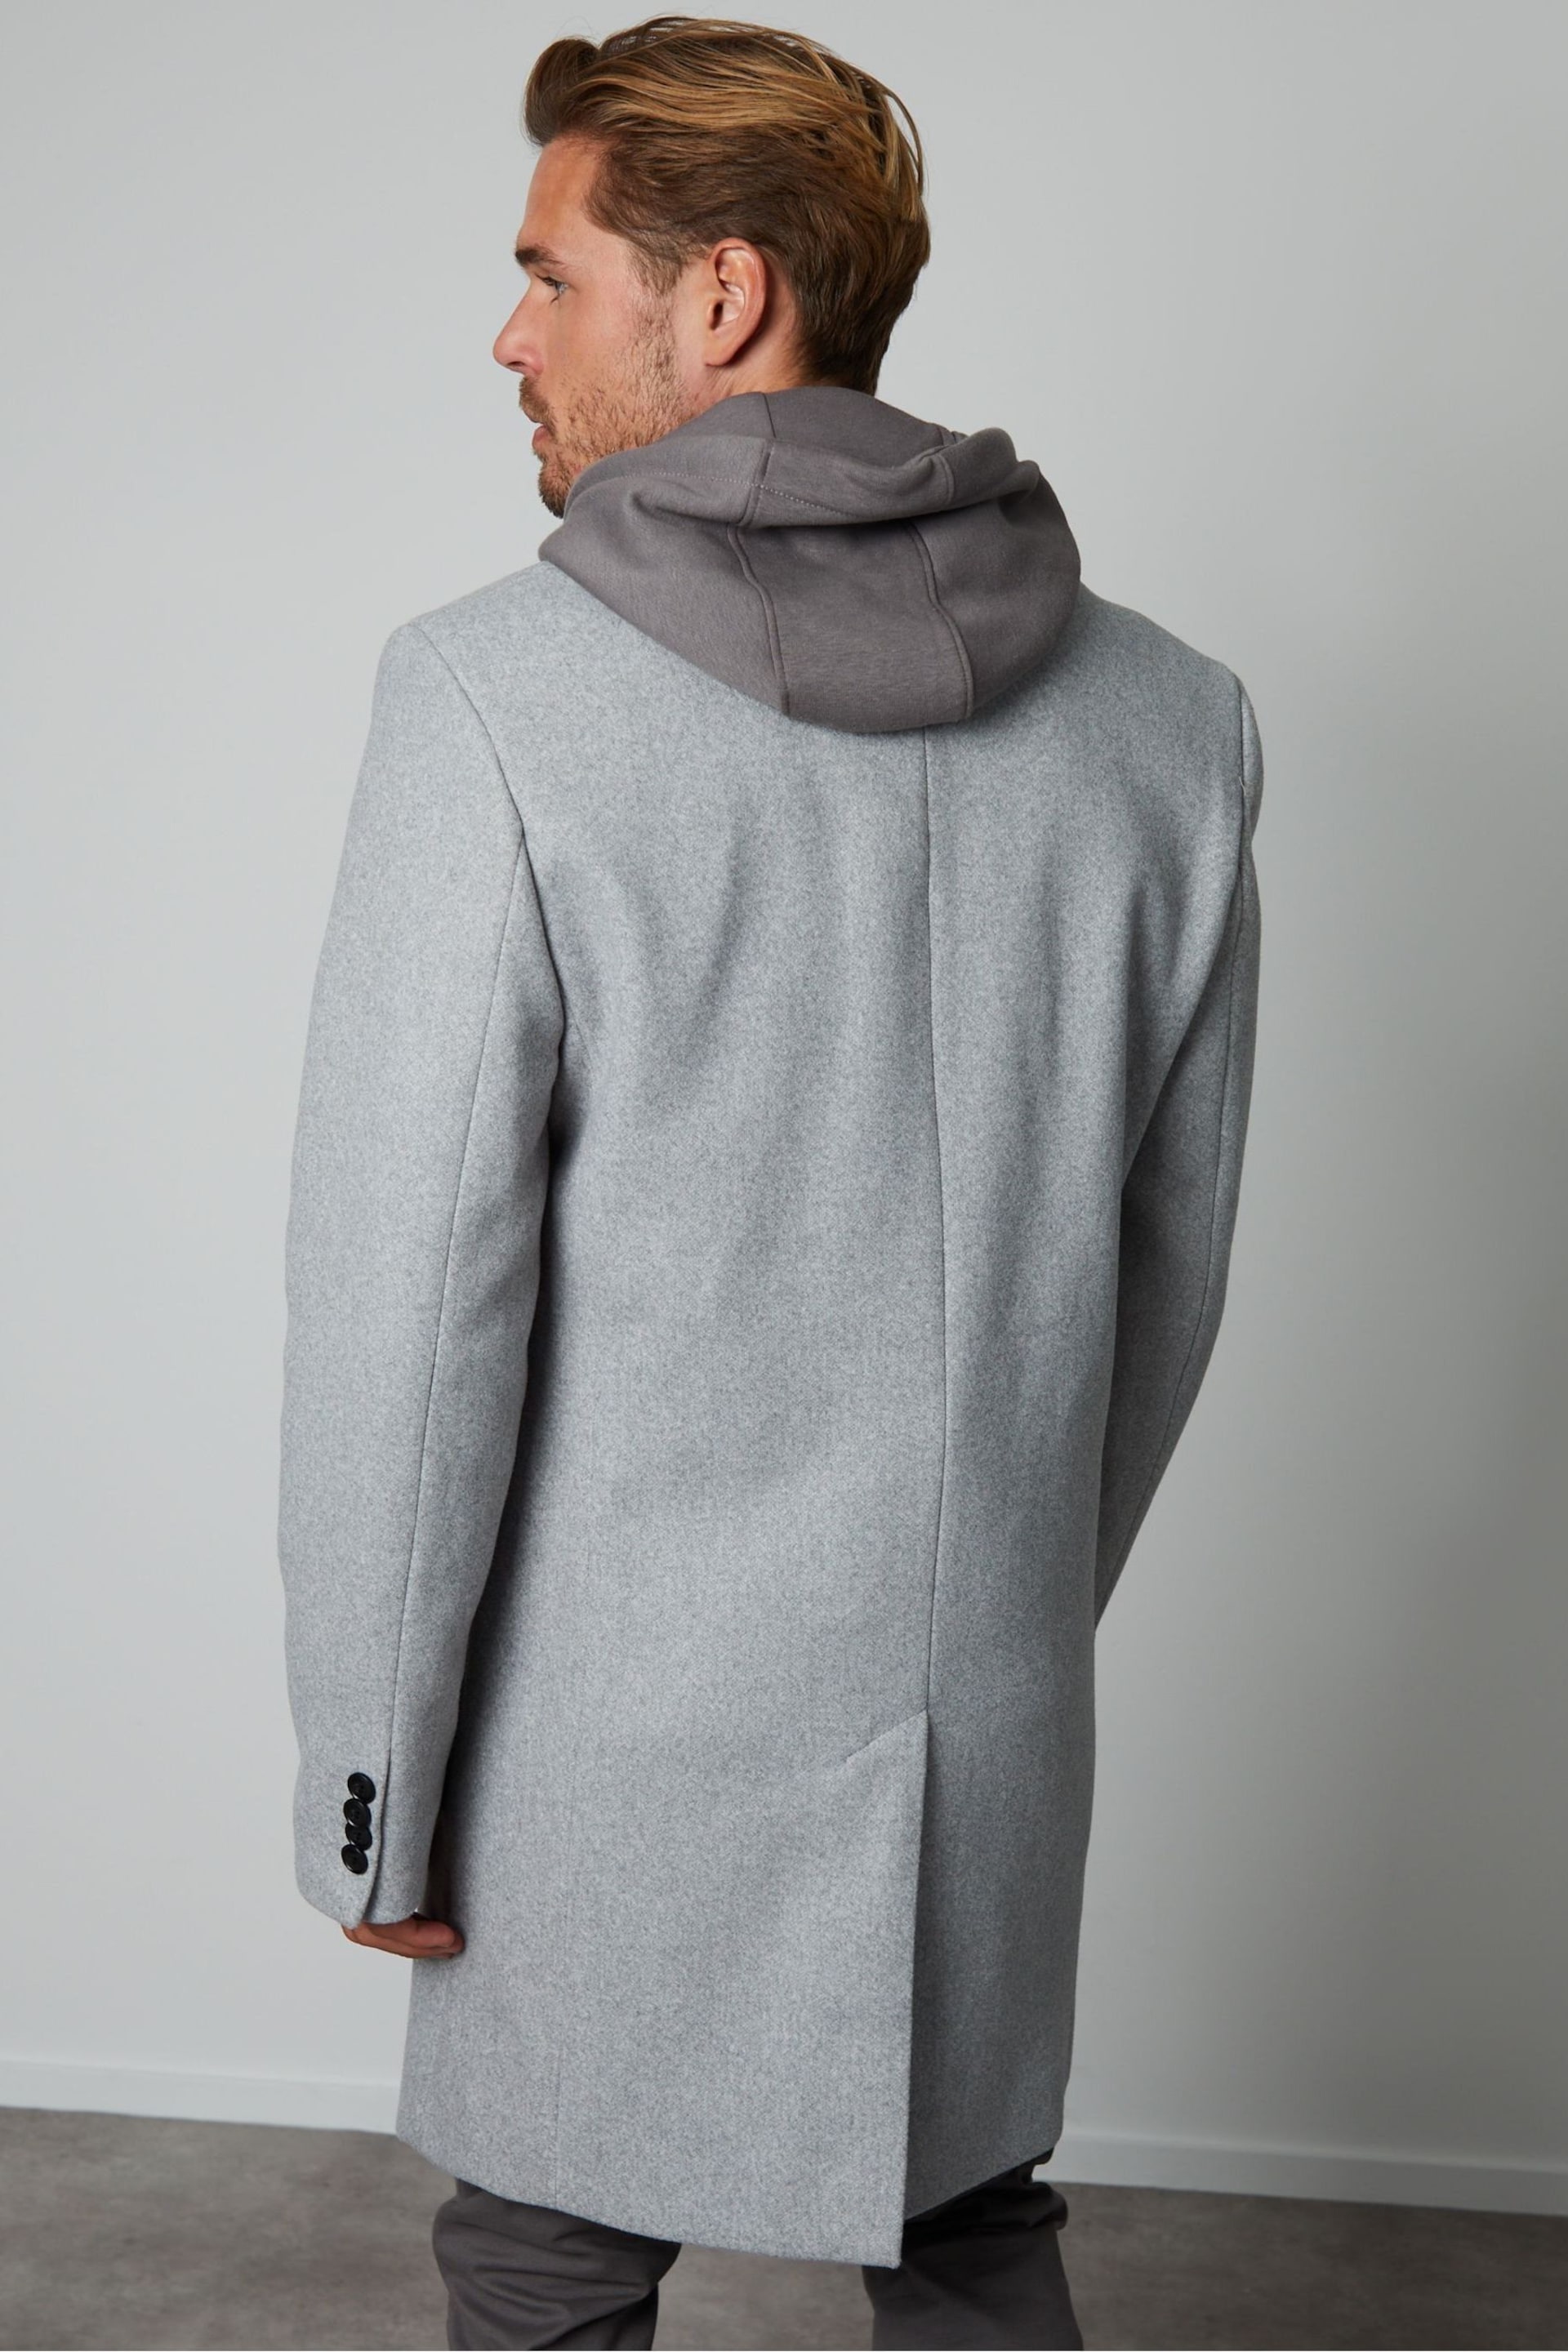 Threadbare Grey Luxe Single Breasted Tailored Coat - Image 2 of 4